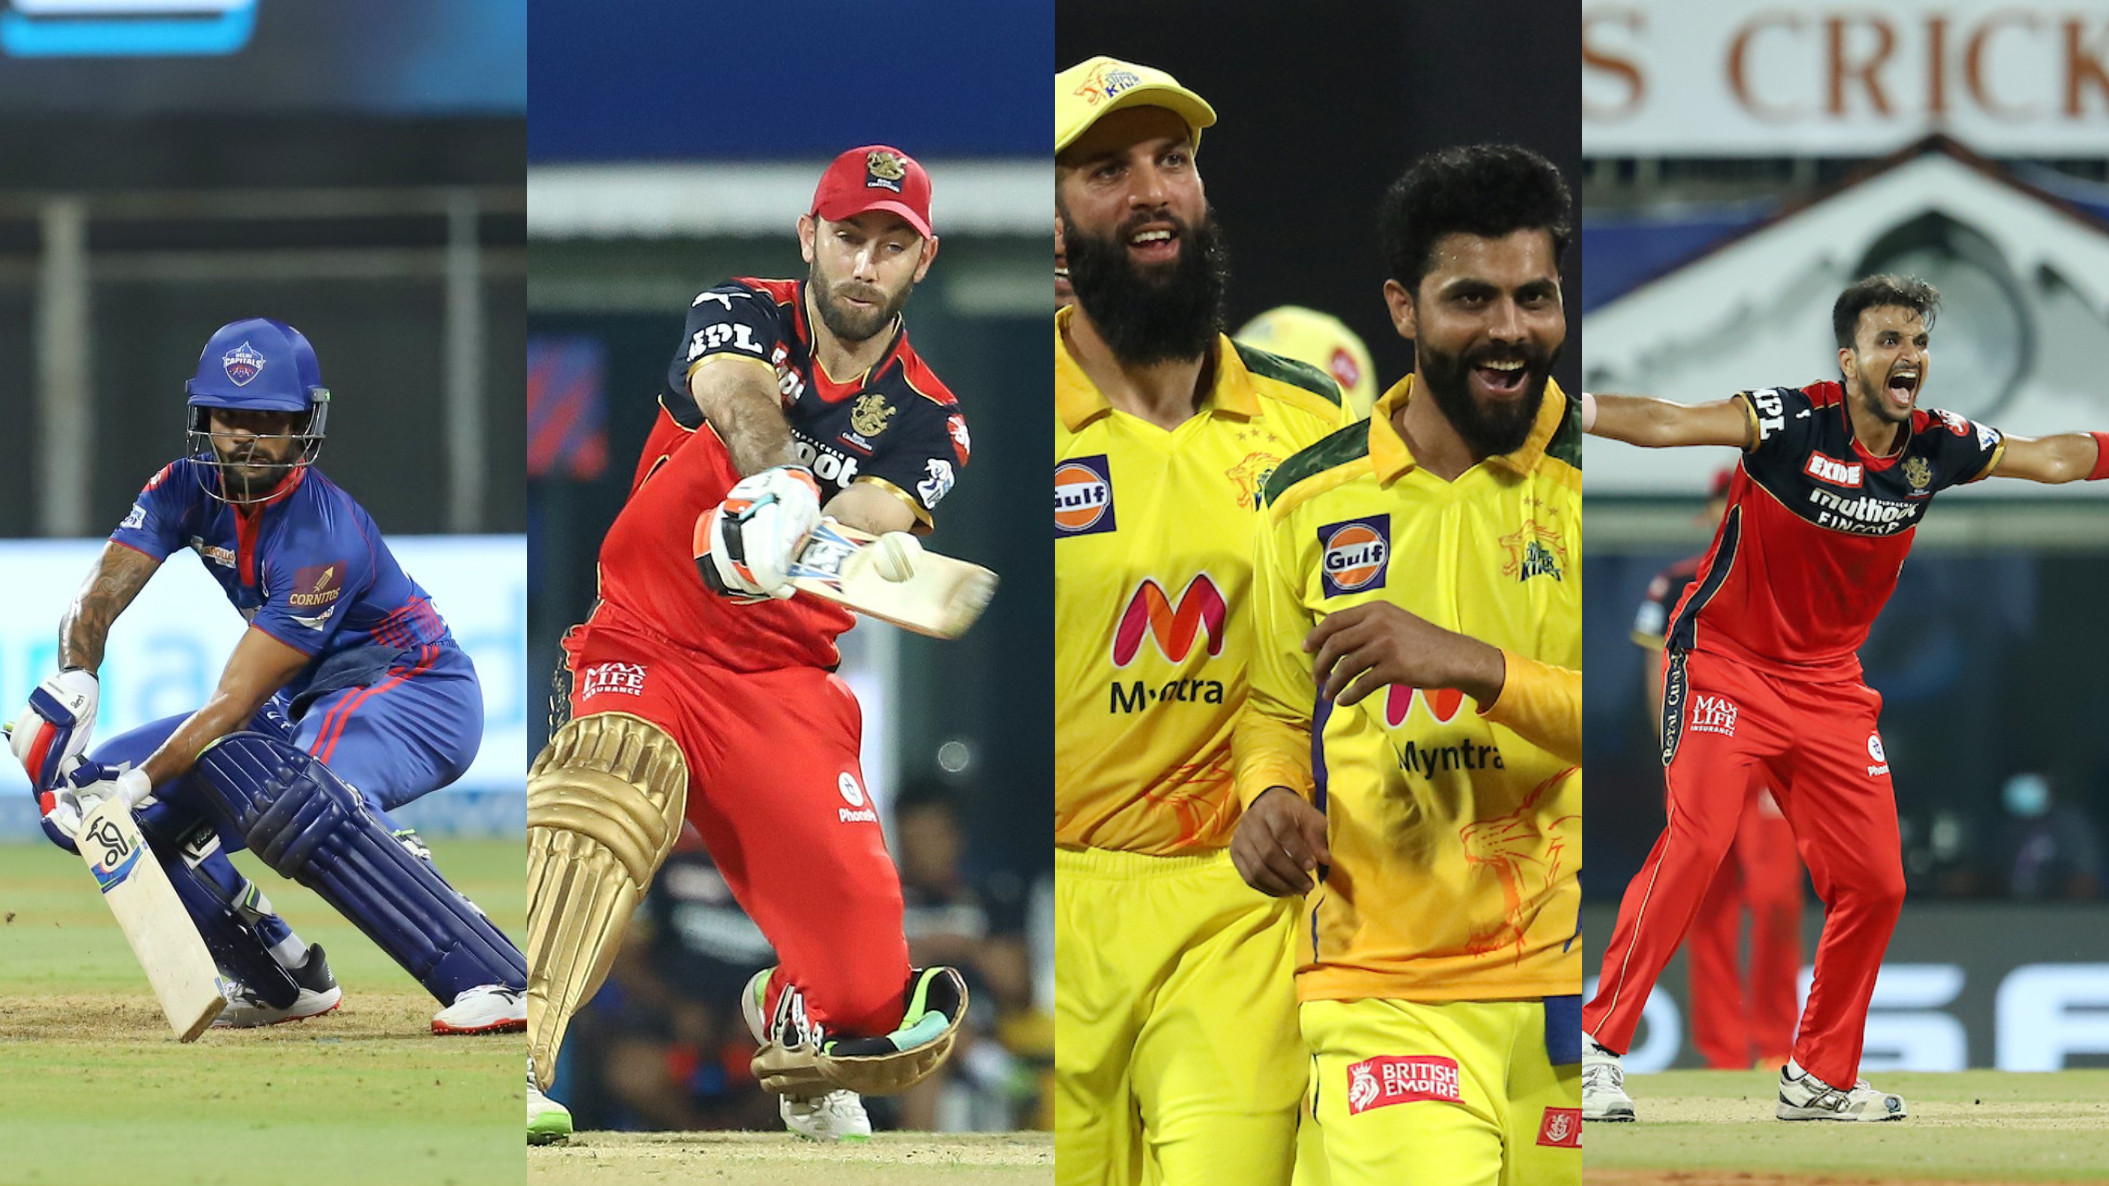 COC Best XI from the first half of the IPL 2021